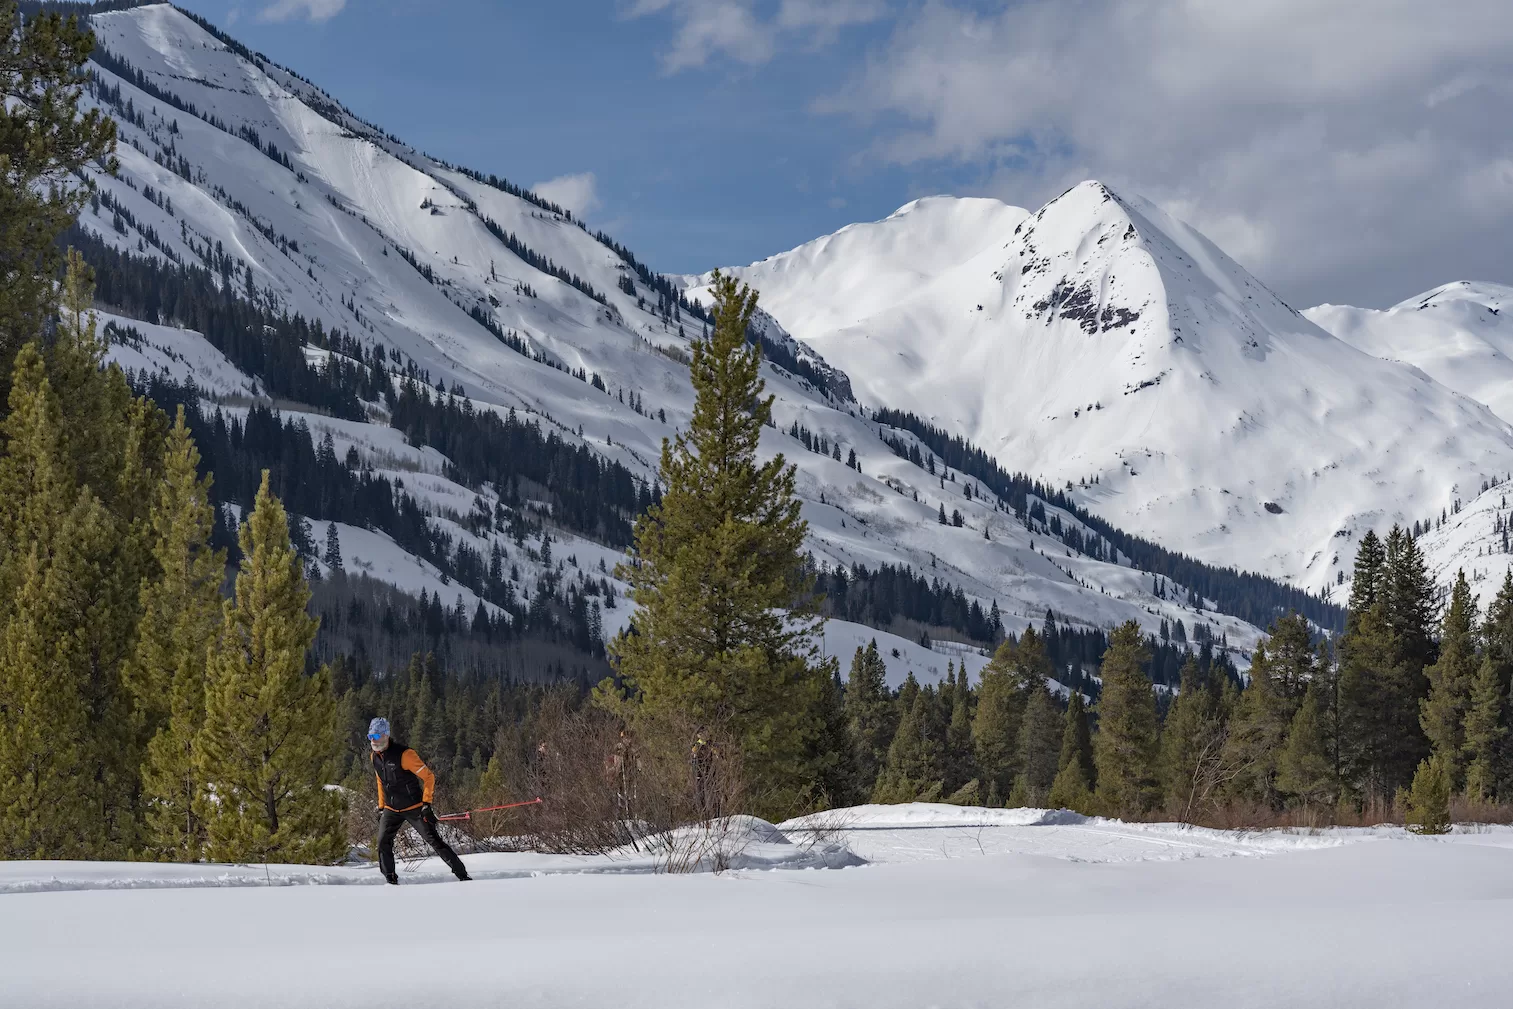 a cross-country skier on a groomed track. There are trees and snowy mountain peaks in the background